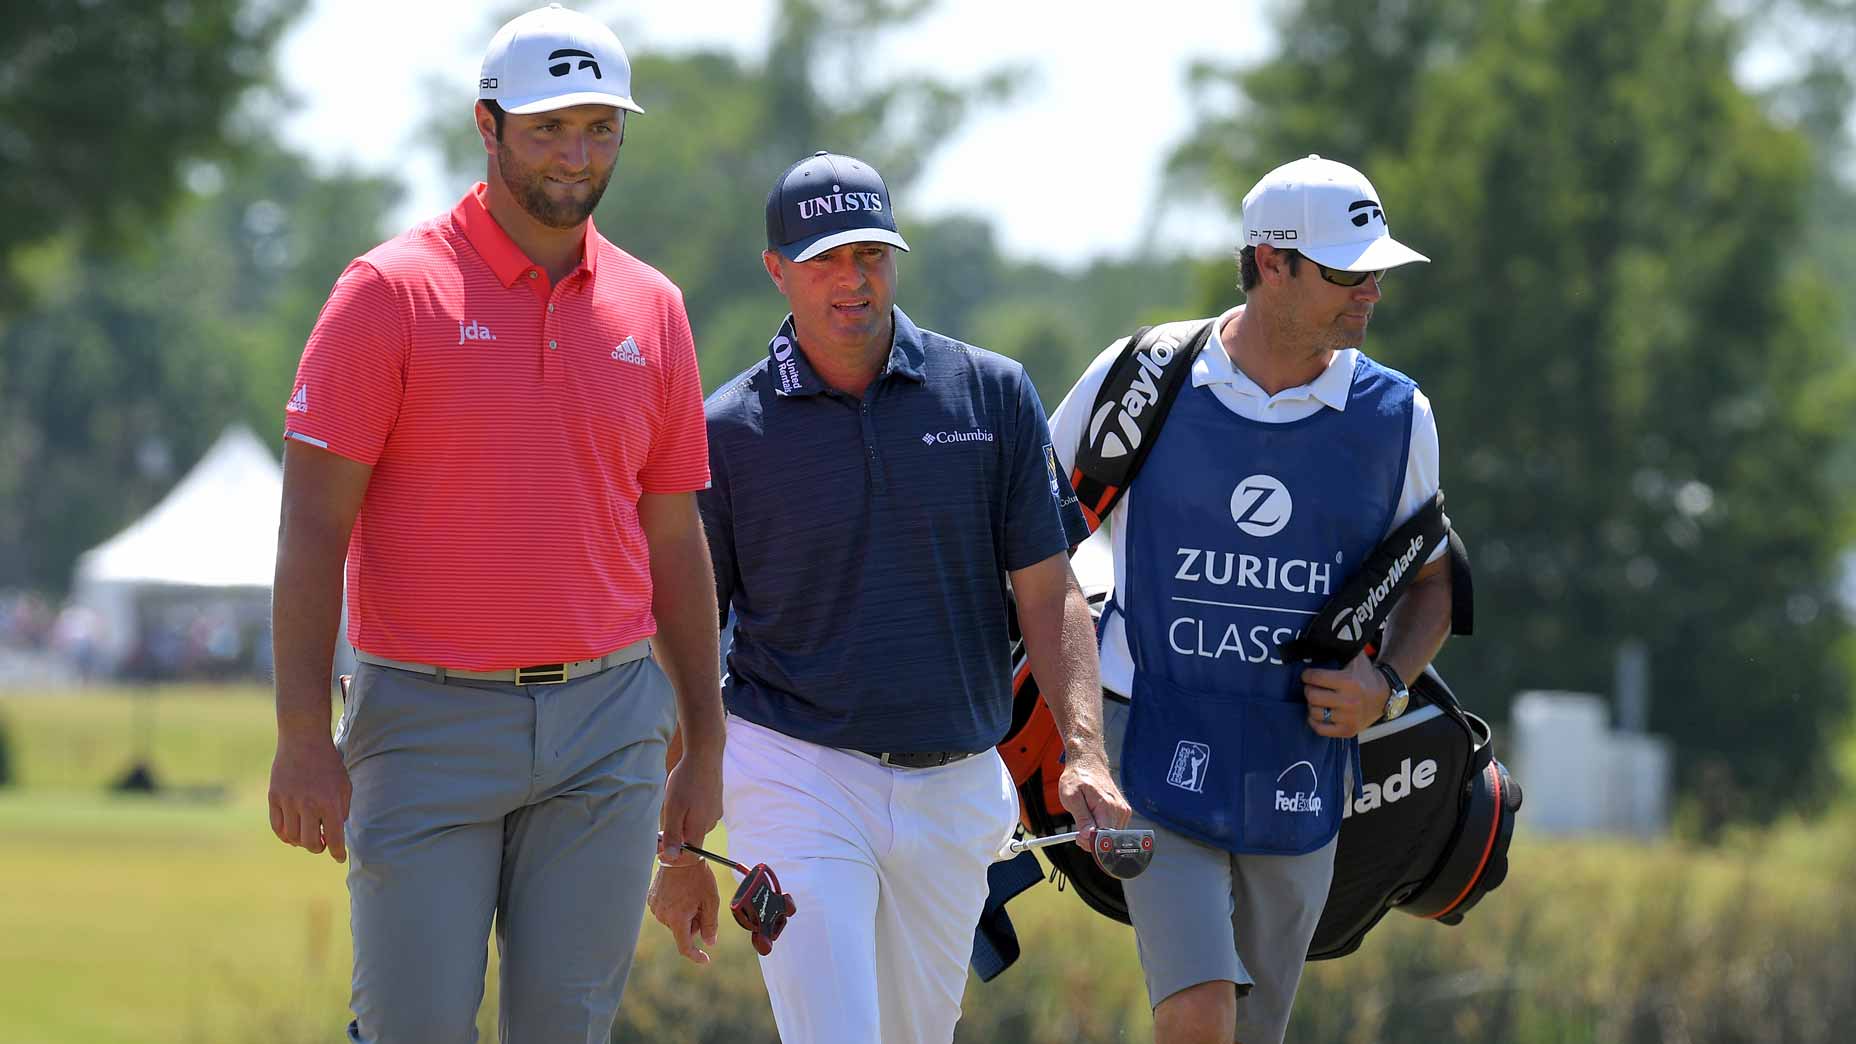 How to watch the 2021 Zurich Classic TV schedule, streaming, tee times